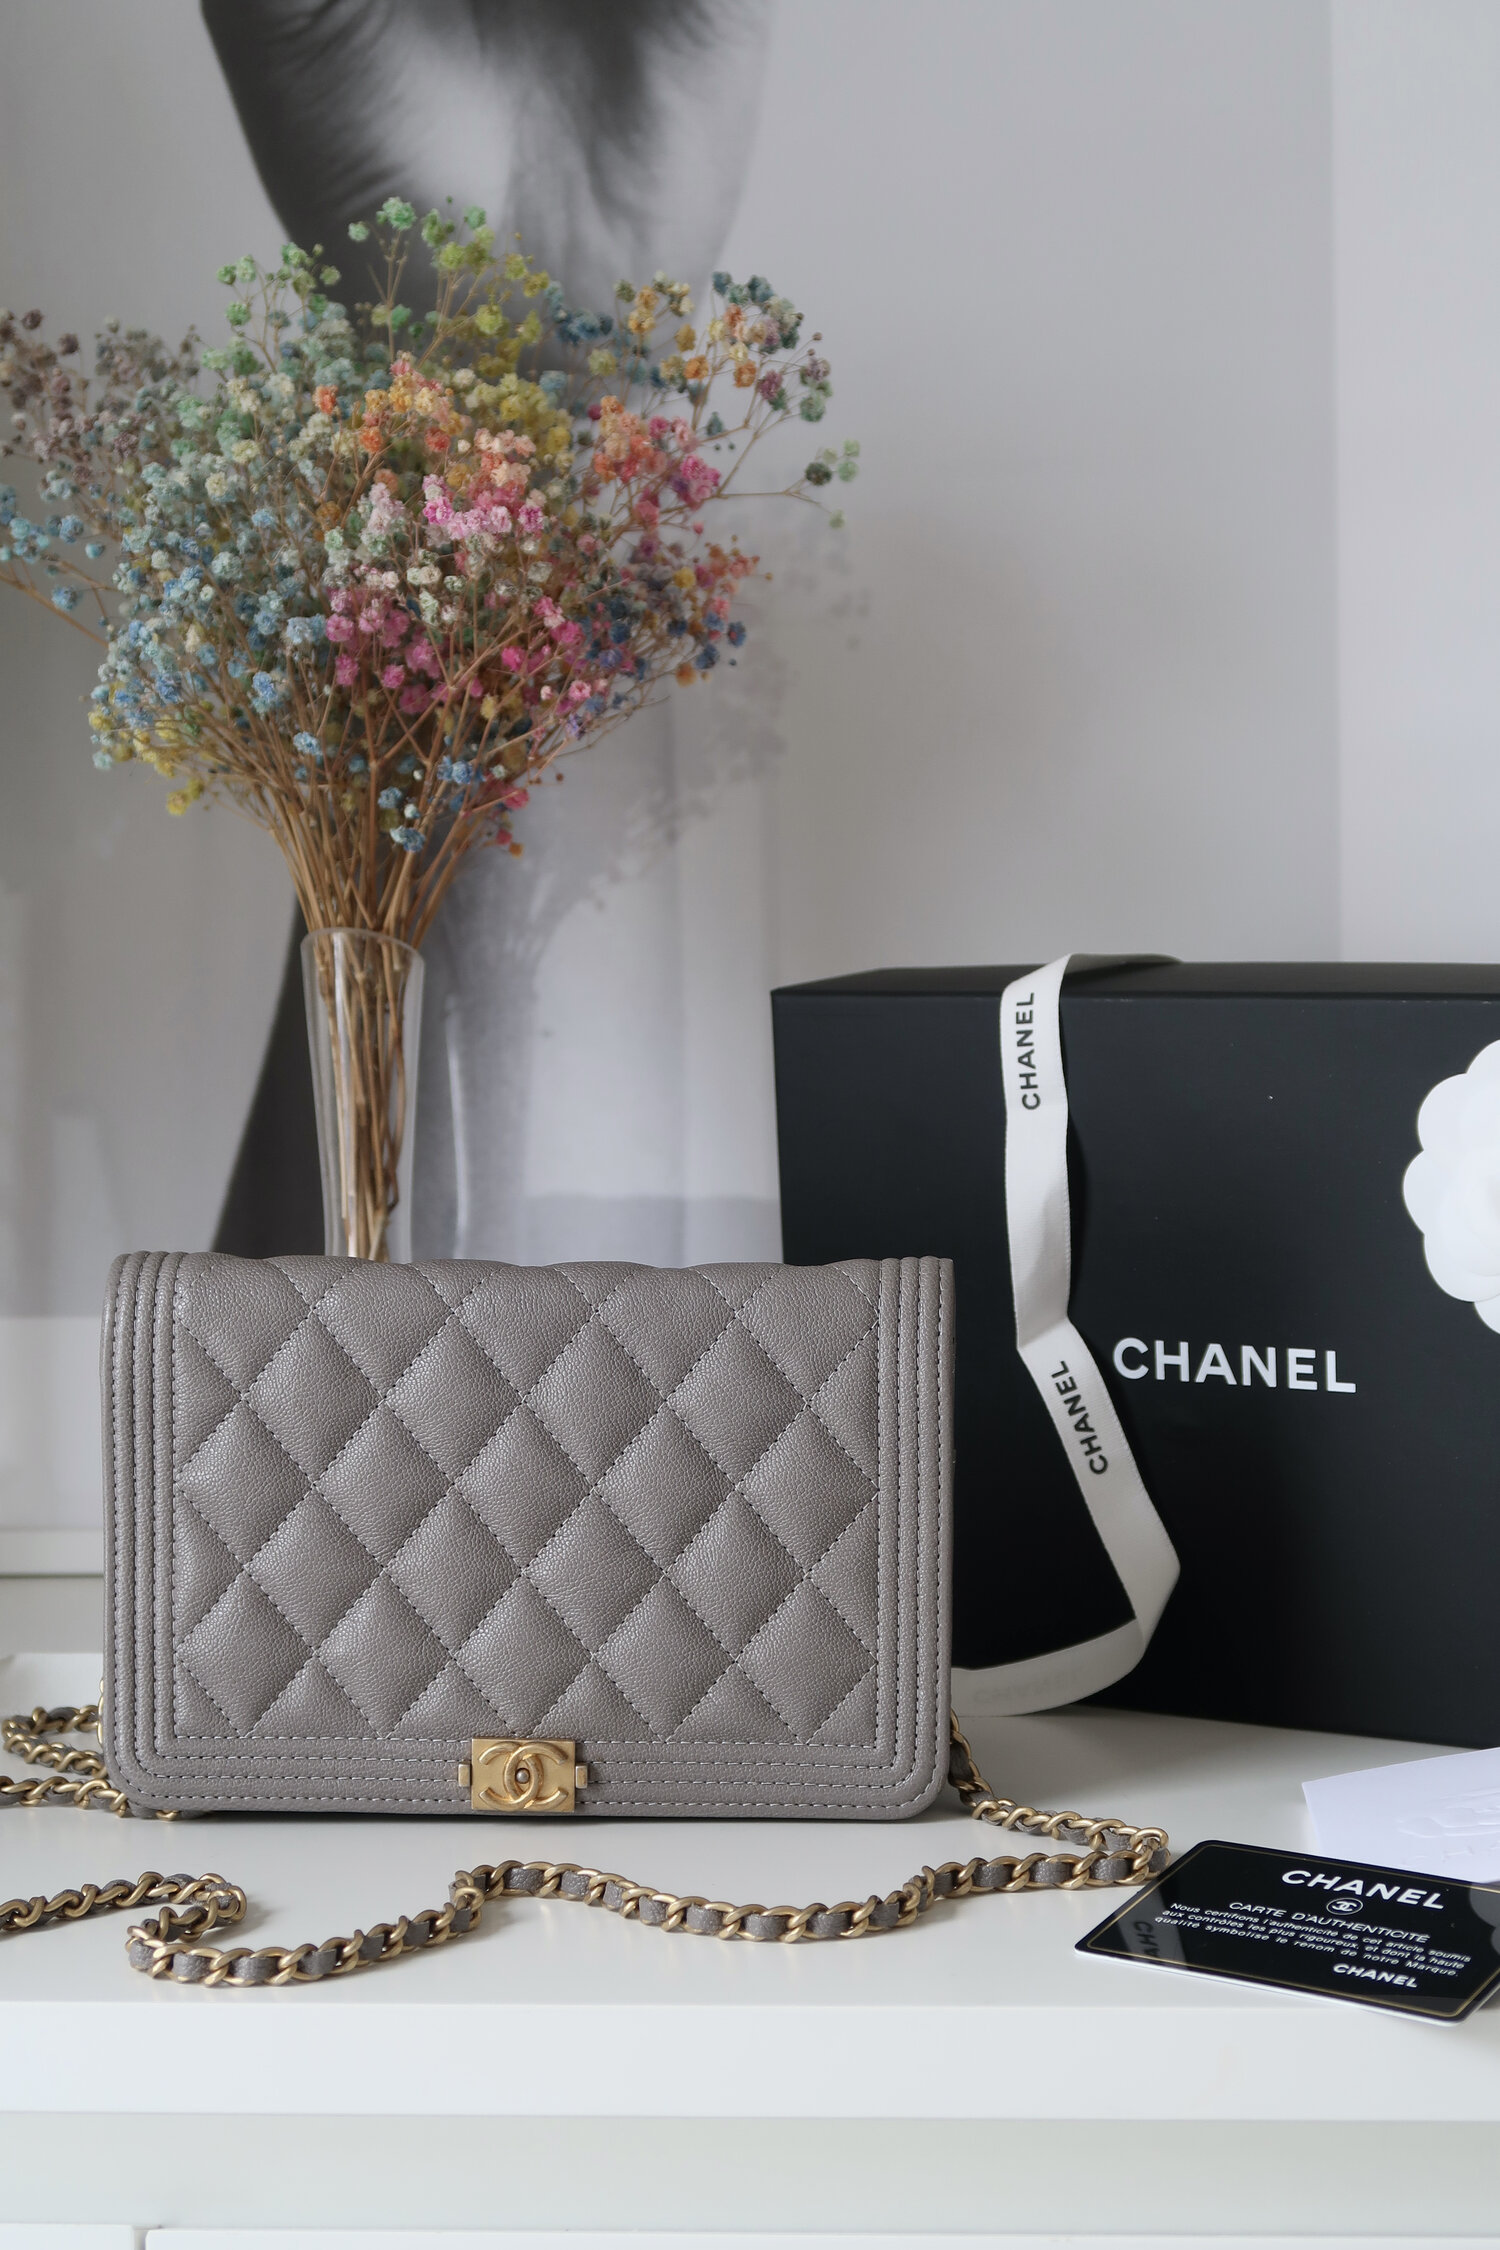 Chanel Brand New Black Quilted Hard Case Compact Vanity Crossbody Bag